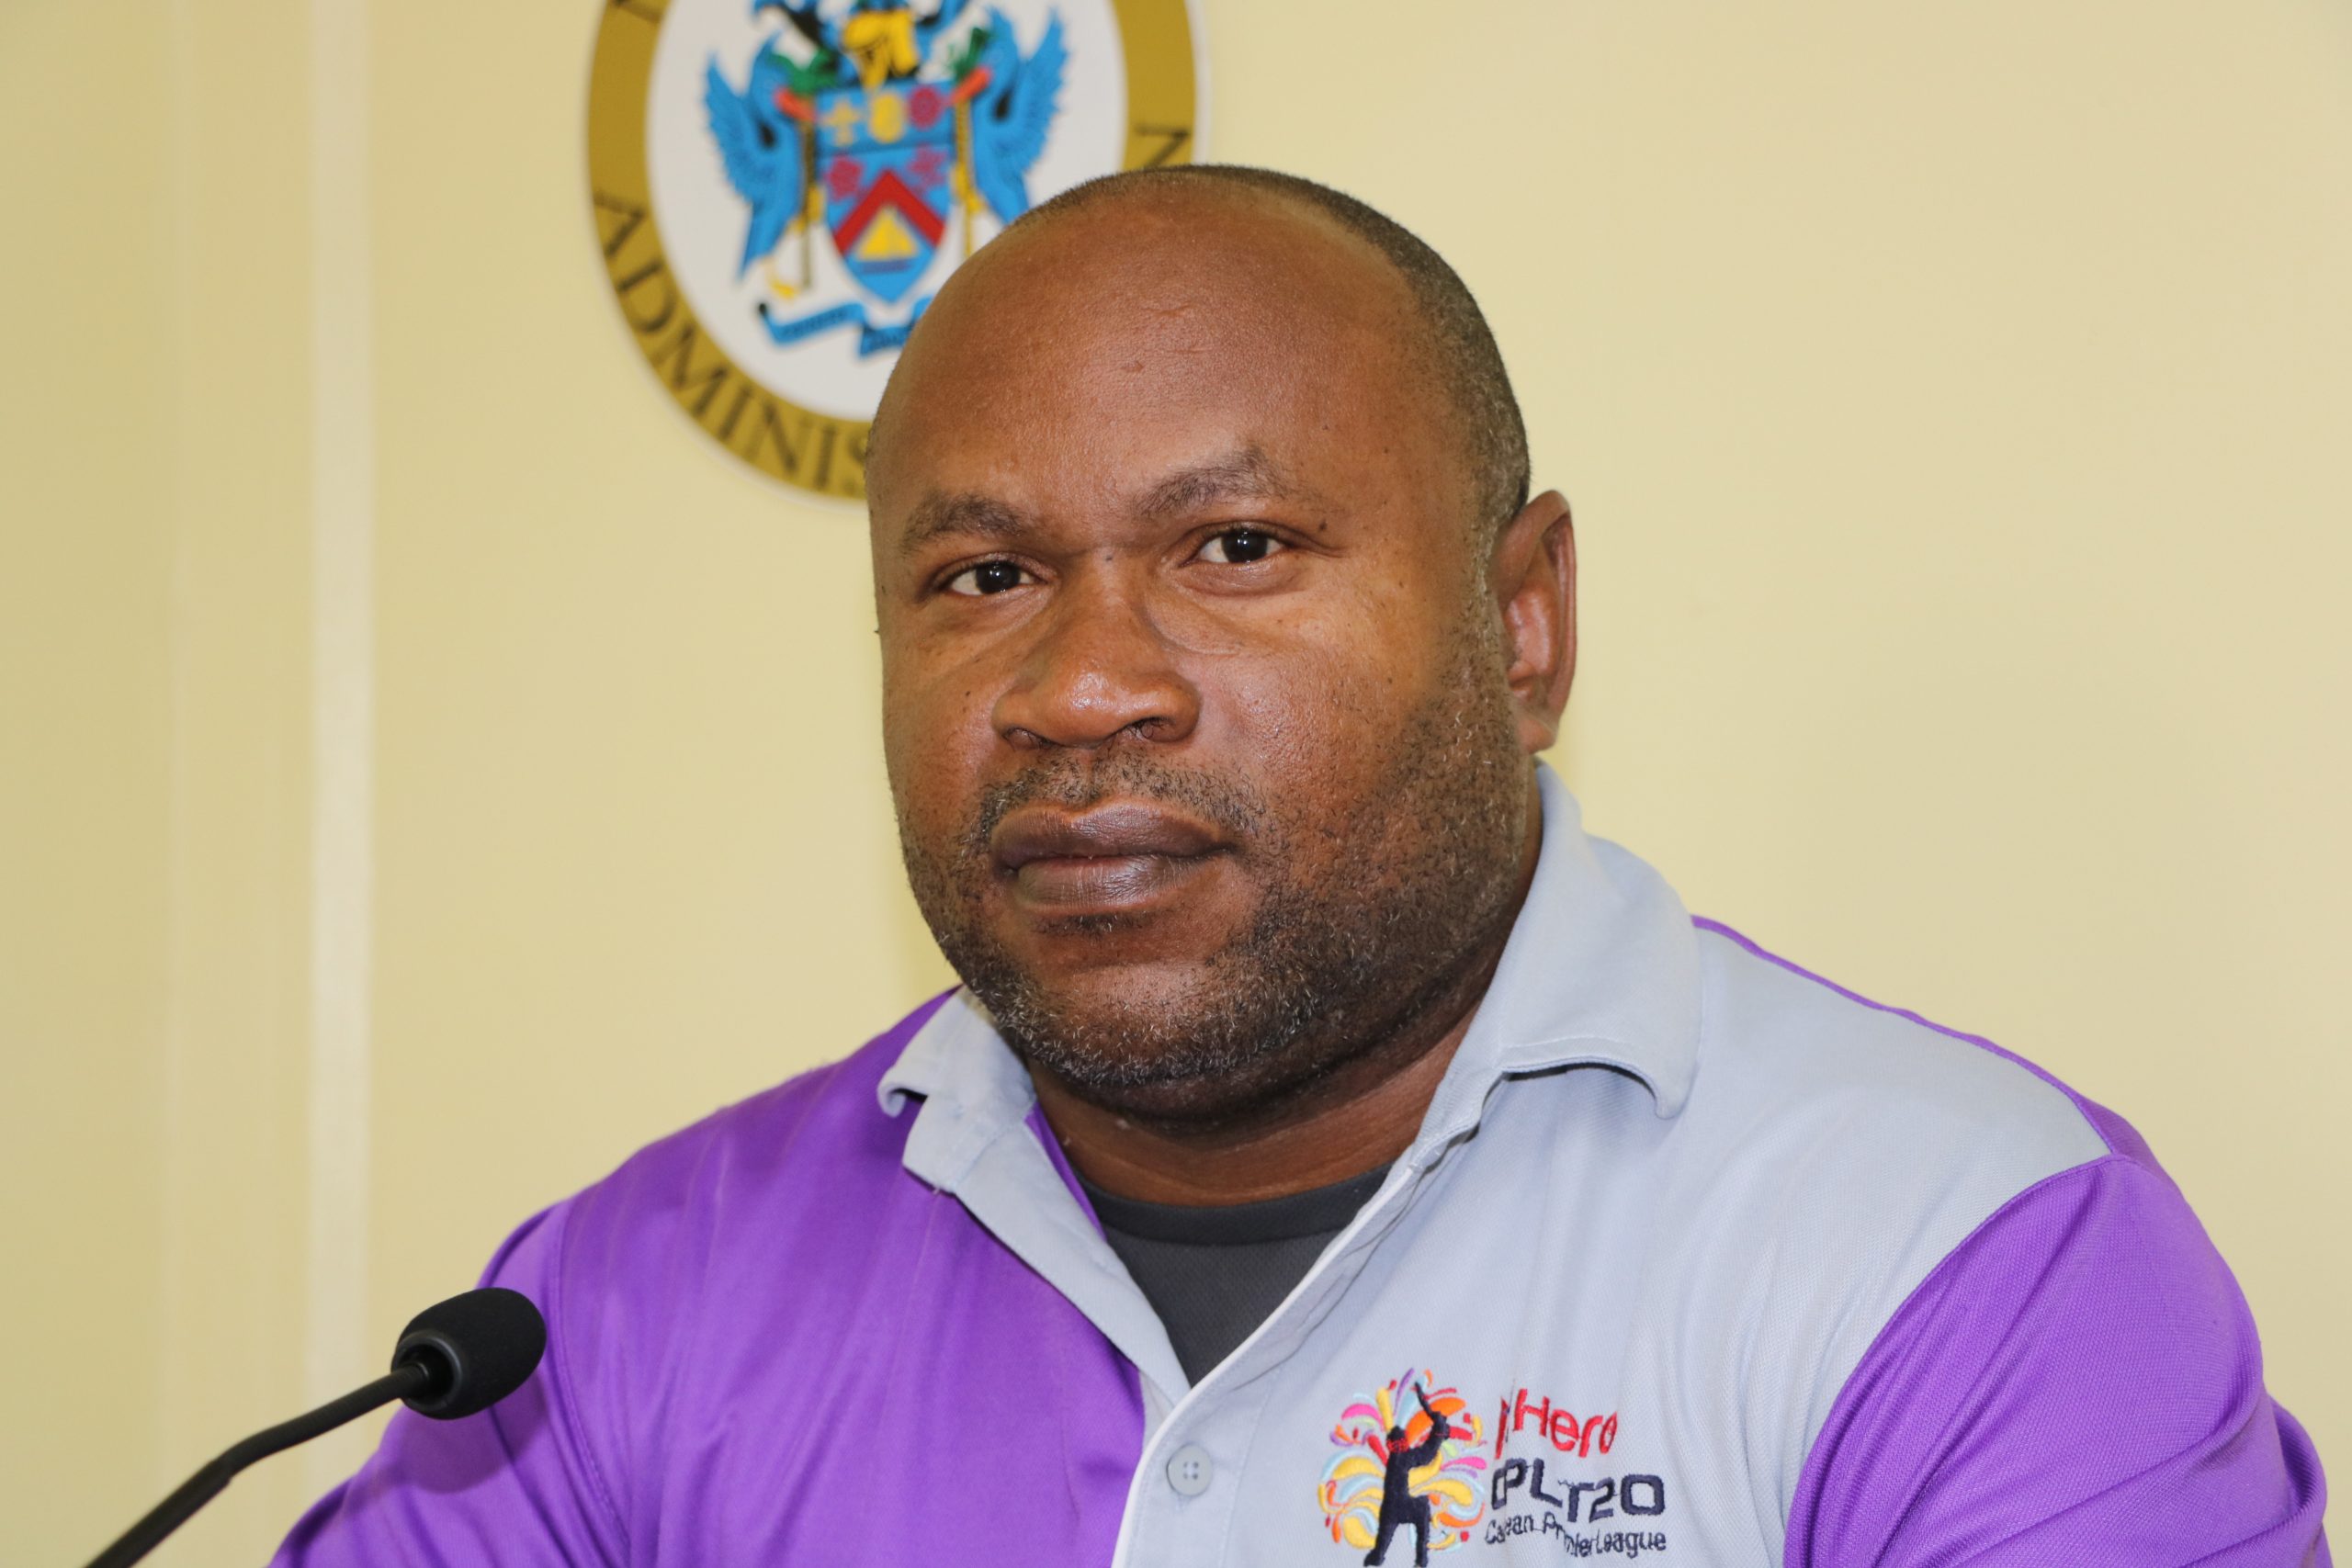 Mr. Jamir Caxton, Director of the Department of Sports on Nevis who also serves as Youth and Sports representative on the Advisory Board of the Boys' Mentorship Programme in Nevis